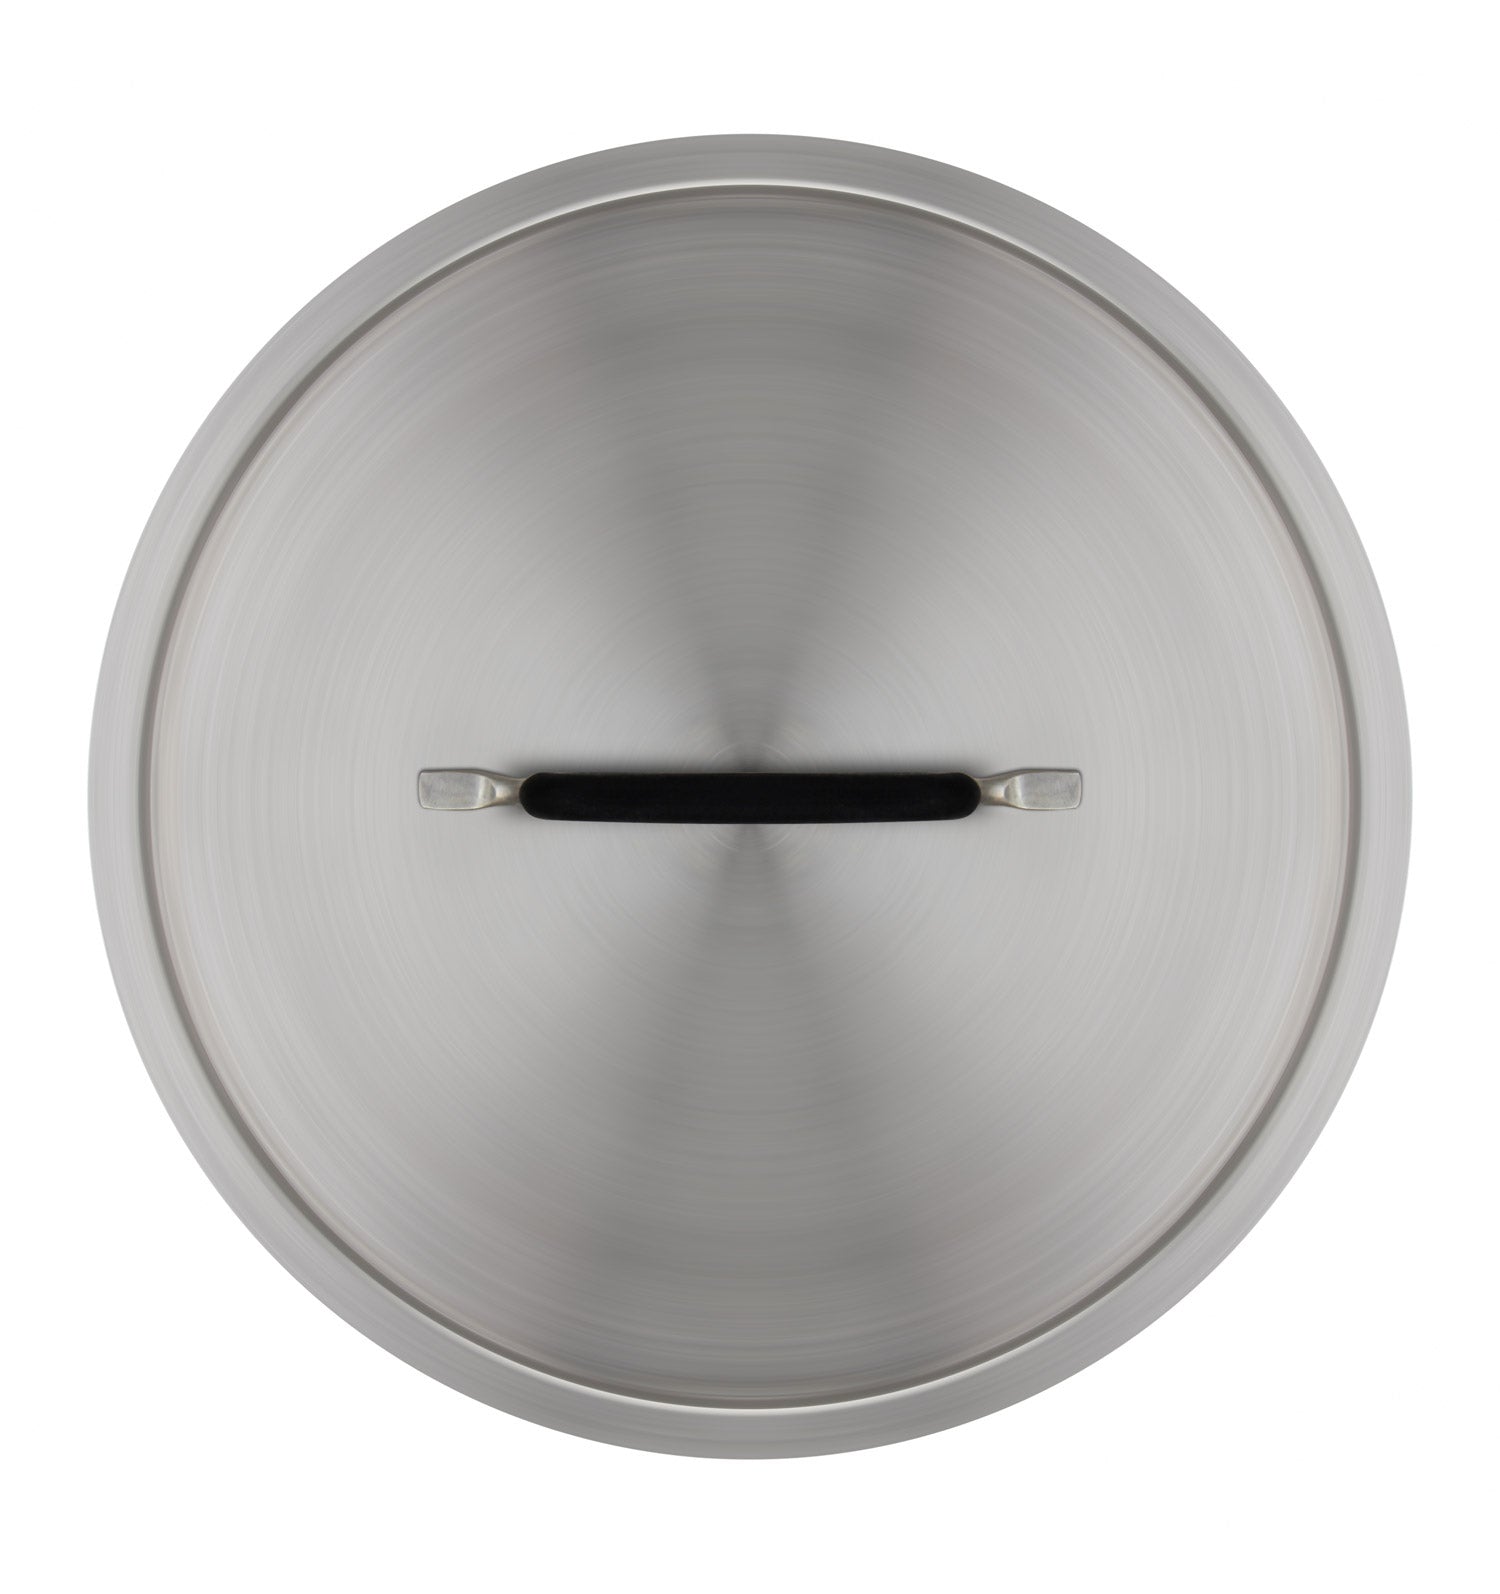 10.5 Gallon Clawhammer Replacement Brewing Lid